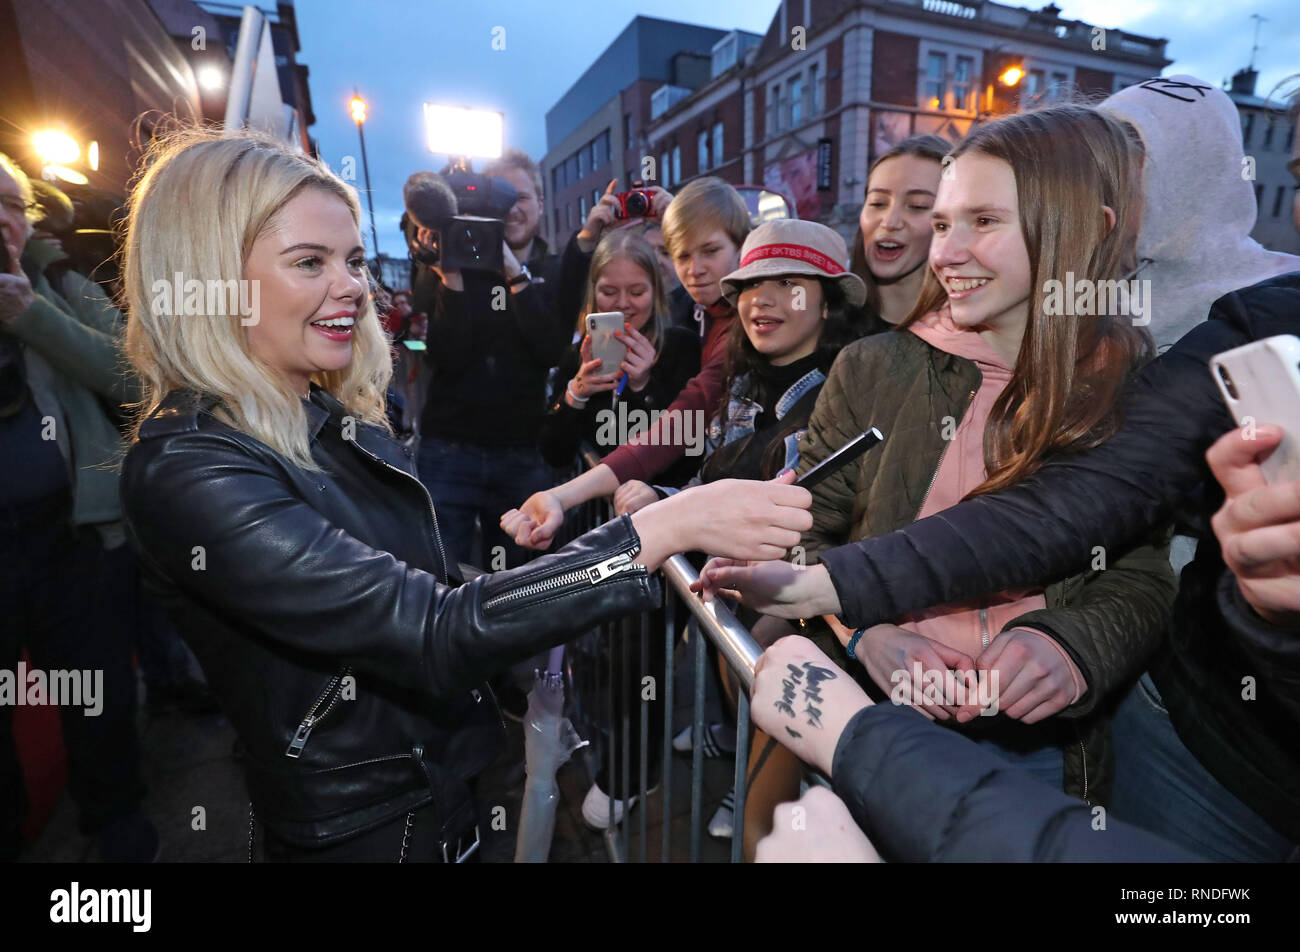 Saoirse-Monica Jackson meets fans as she arrives at the Omniplex Cinema in Londonderry for the Derry Girls premiere ahead of the broadcast of the second series on Channel 4. Stock Photo